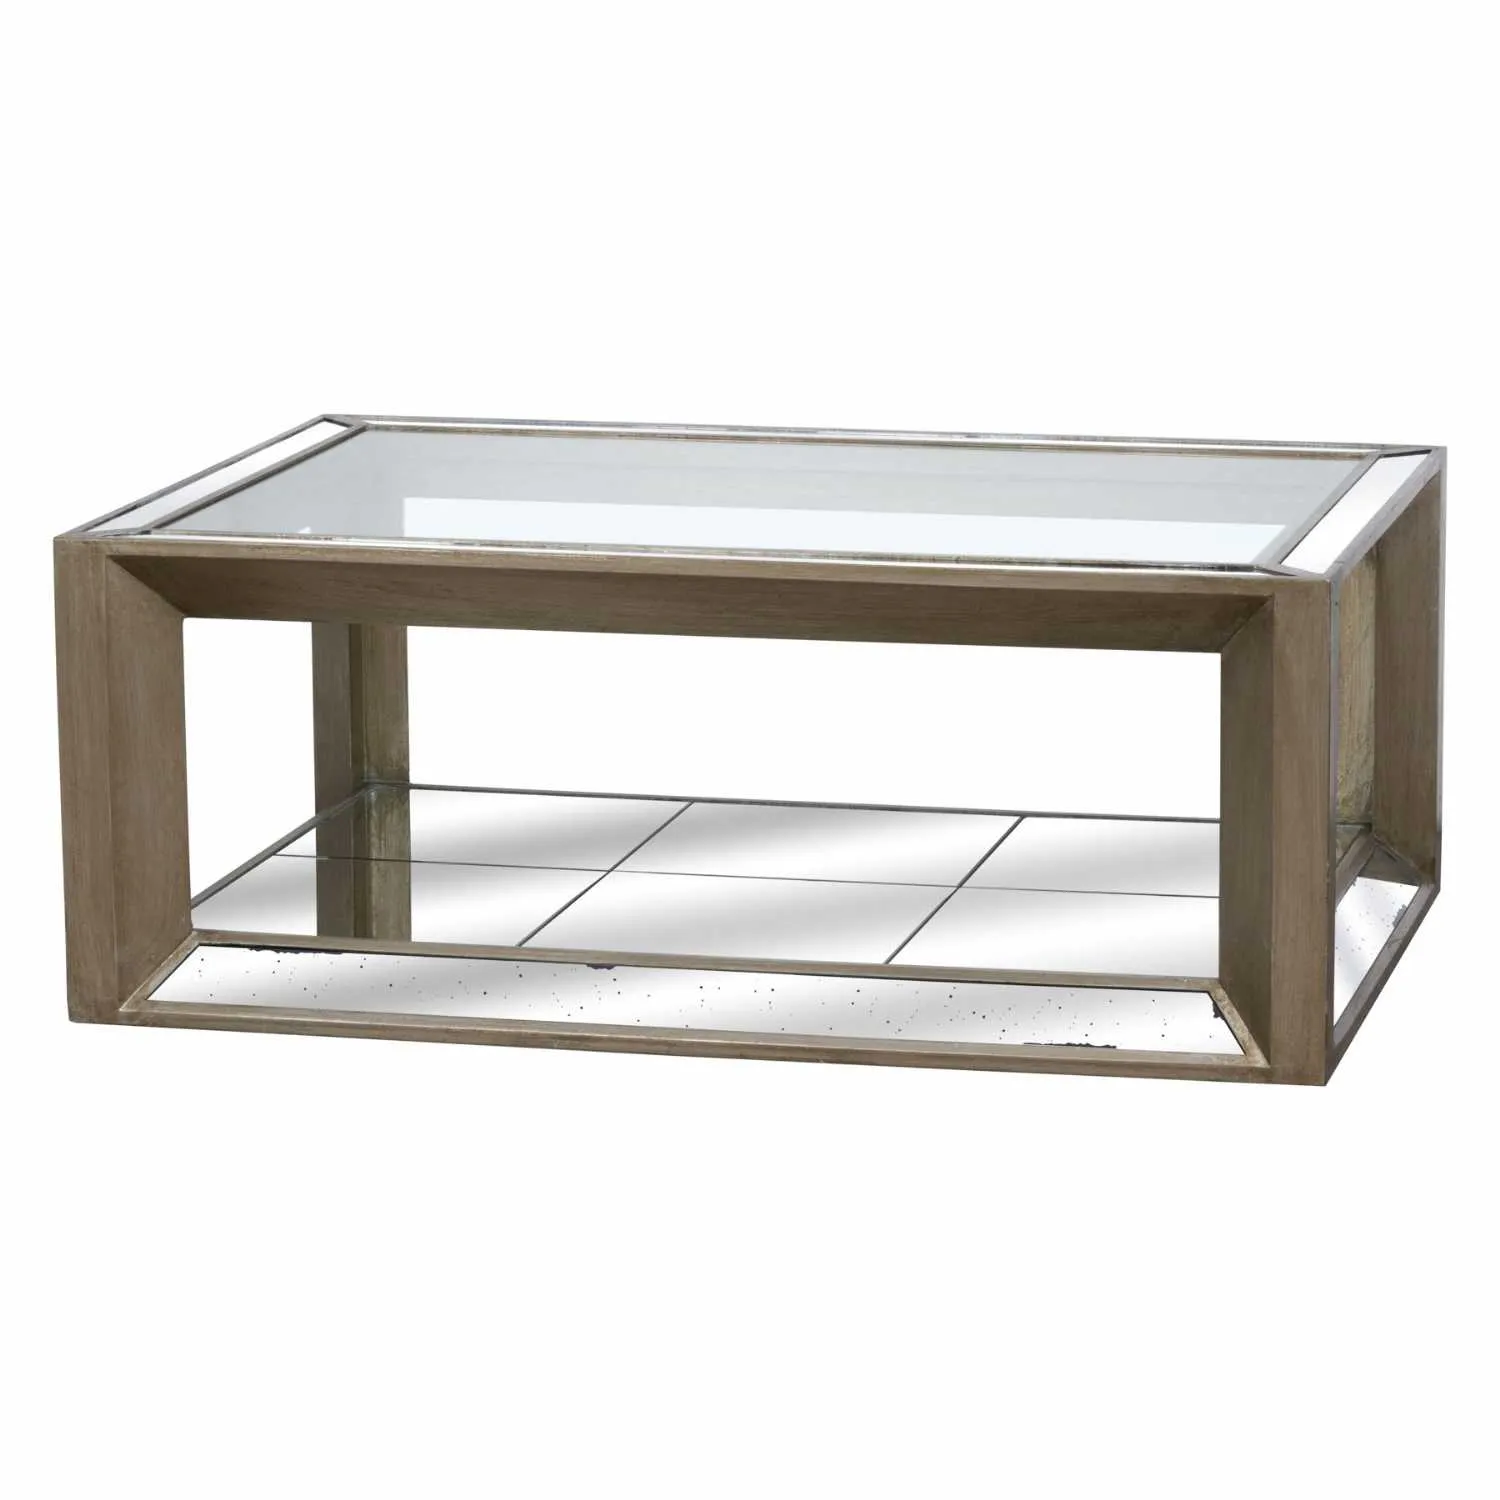 Large Augustus Mirrored Painted Antique Metallic Finished Coffee Table